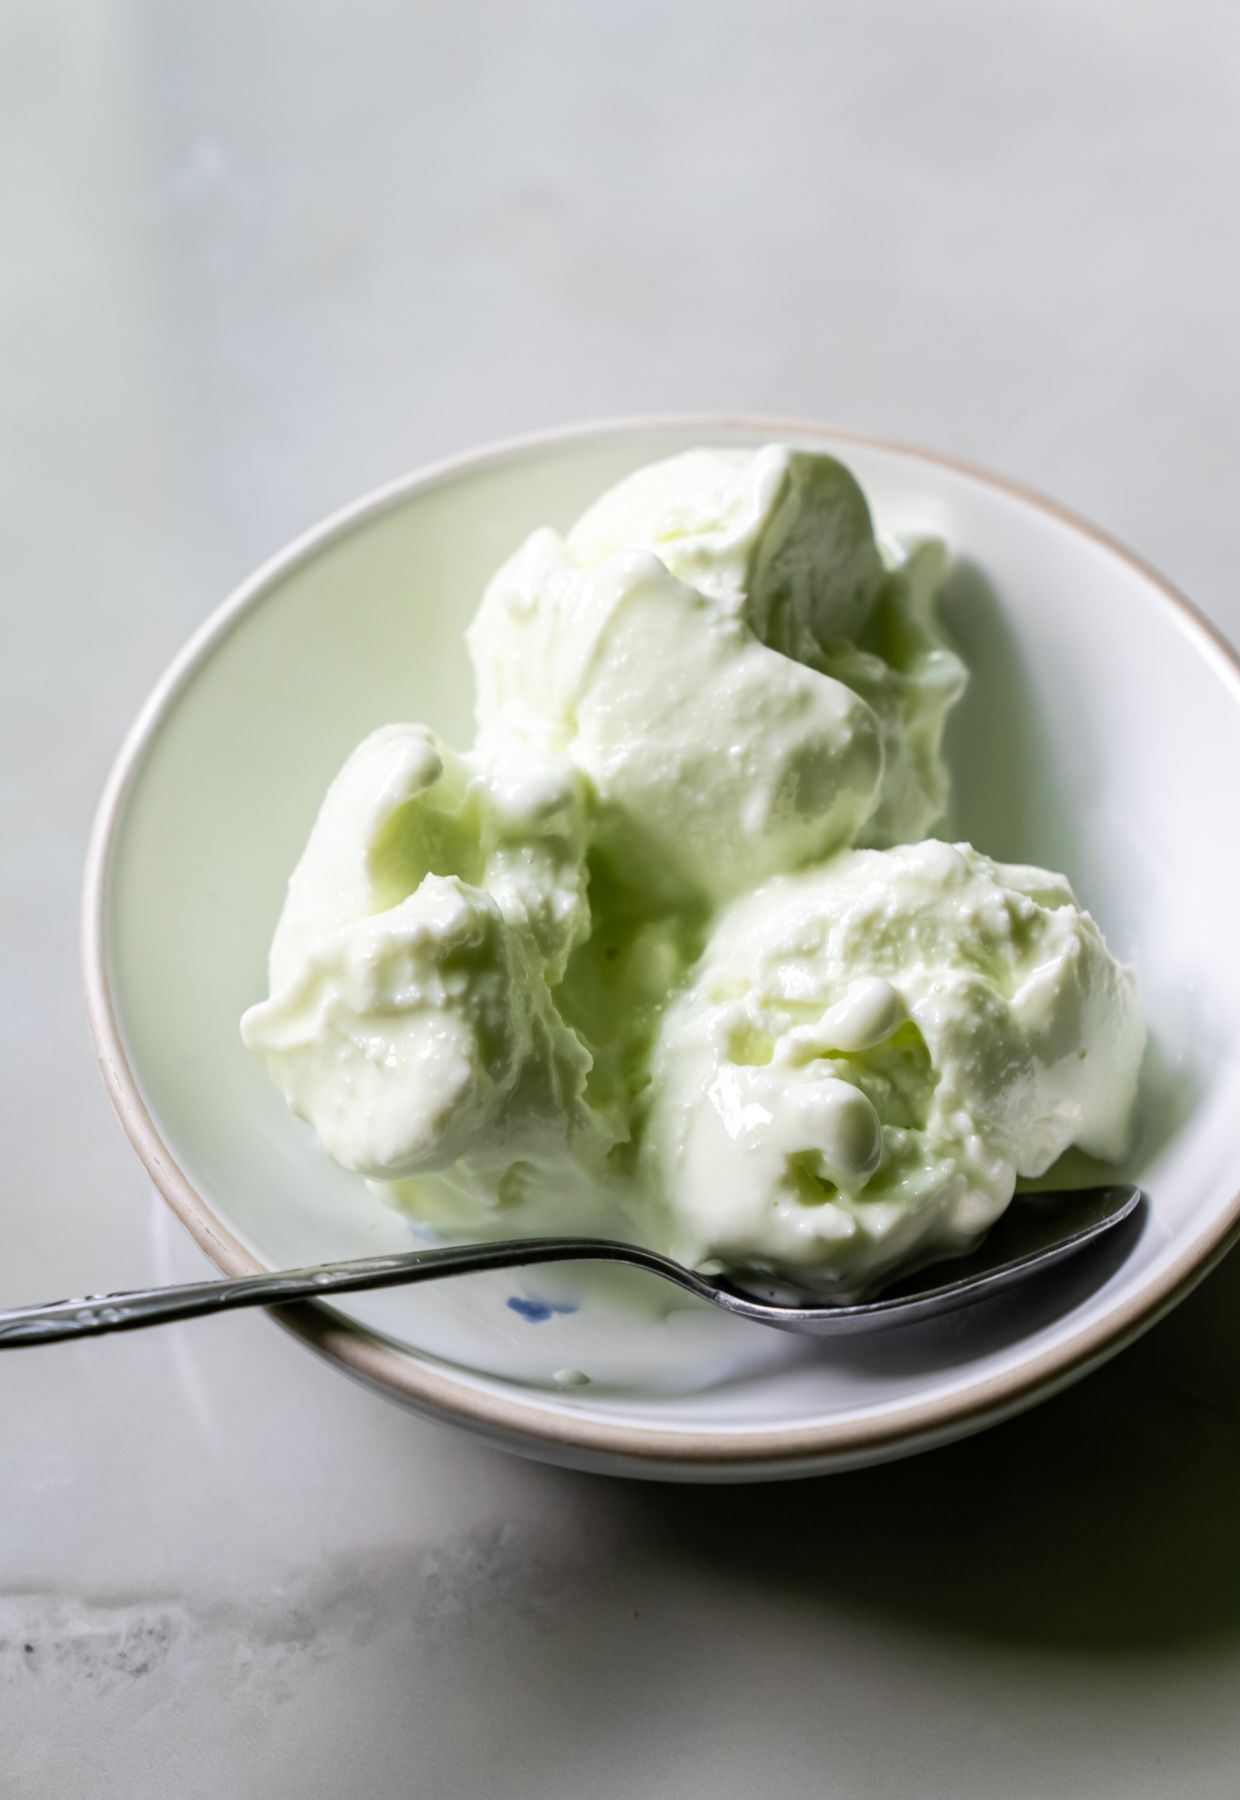 A white bowl containing three scoops of green ice cream, a delightful dessert, with a metal spoon placed beside them on a light gray surface.